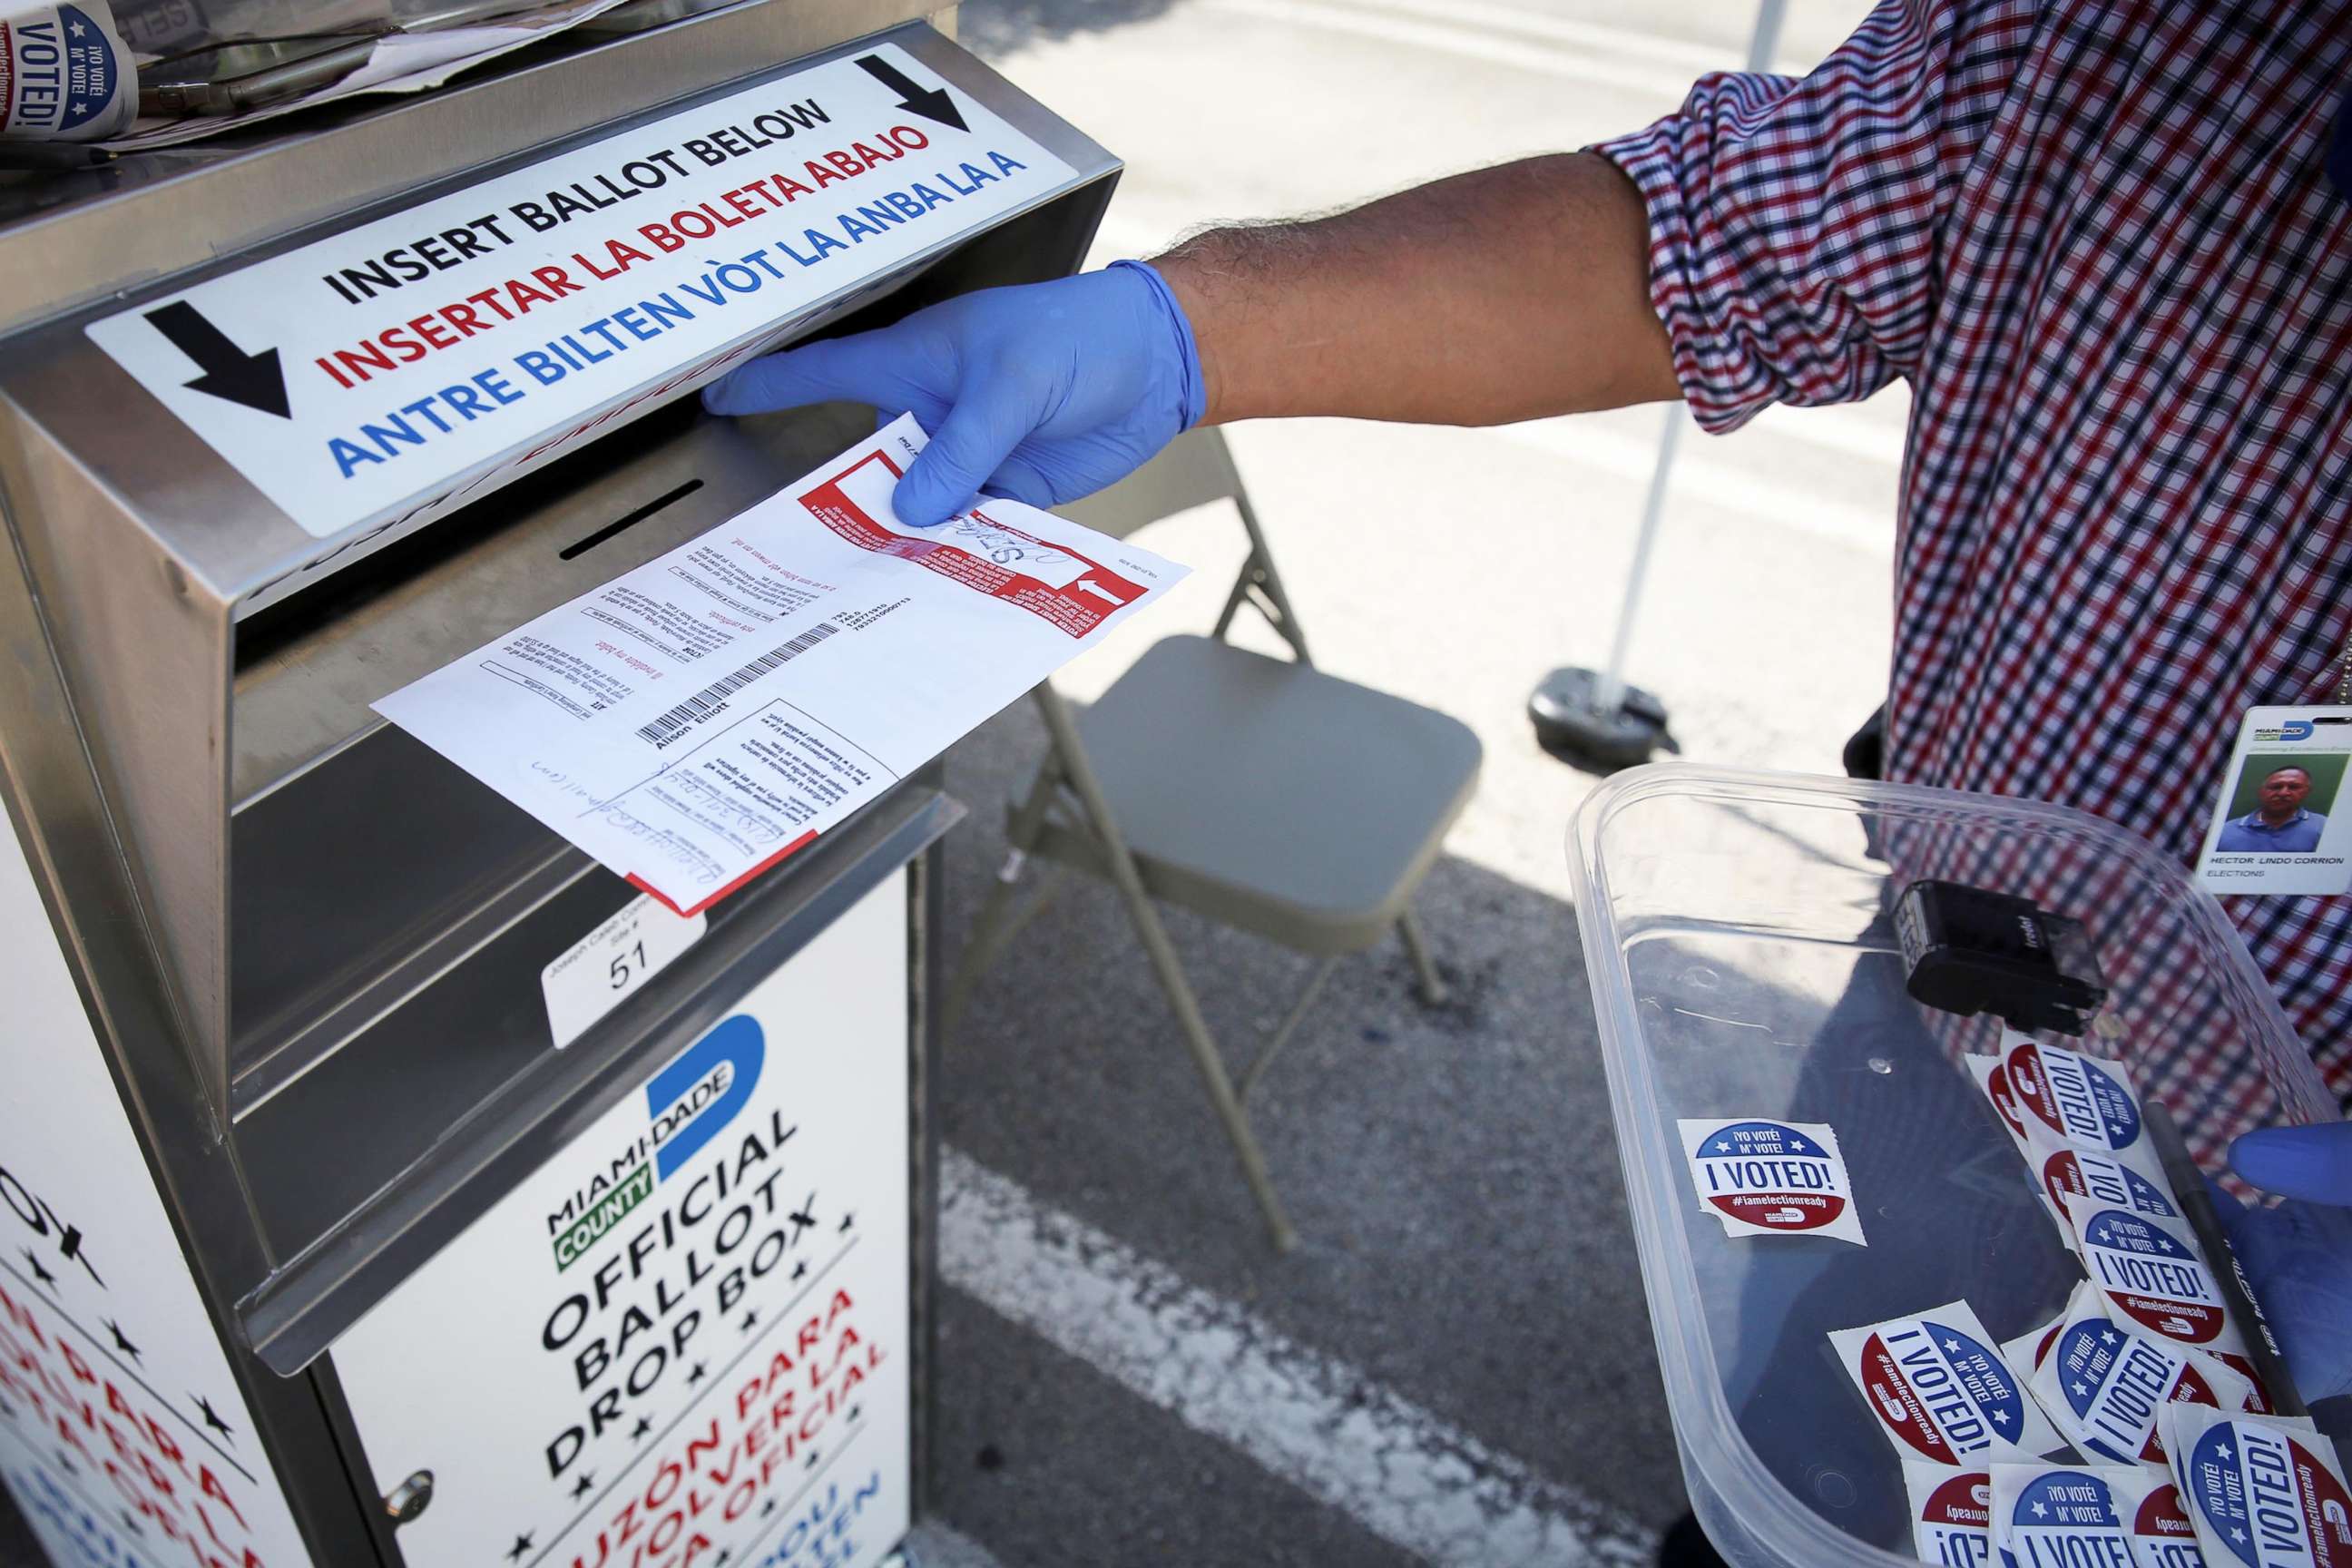 PHOTO: A poll worker casts a mail-in ballot for a voter at a drive-thru polling station during the primary election amid the COVID-19 outbreak in Miami, Aug. 18, 2020.